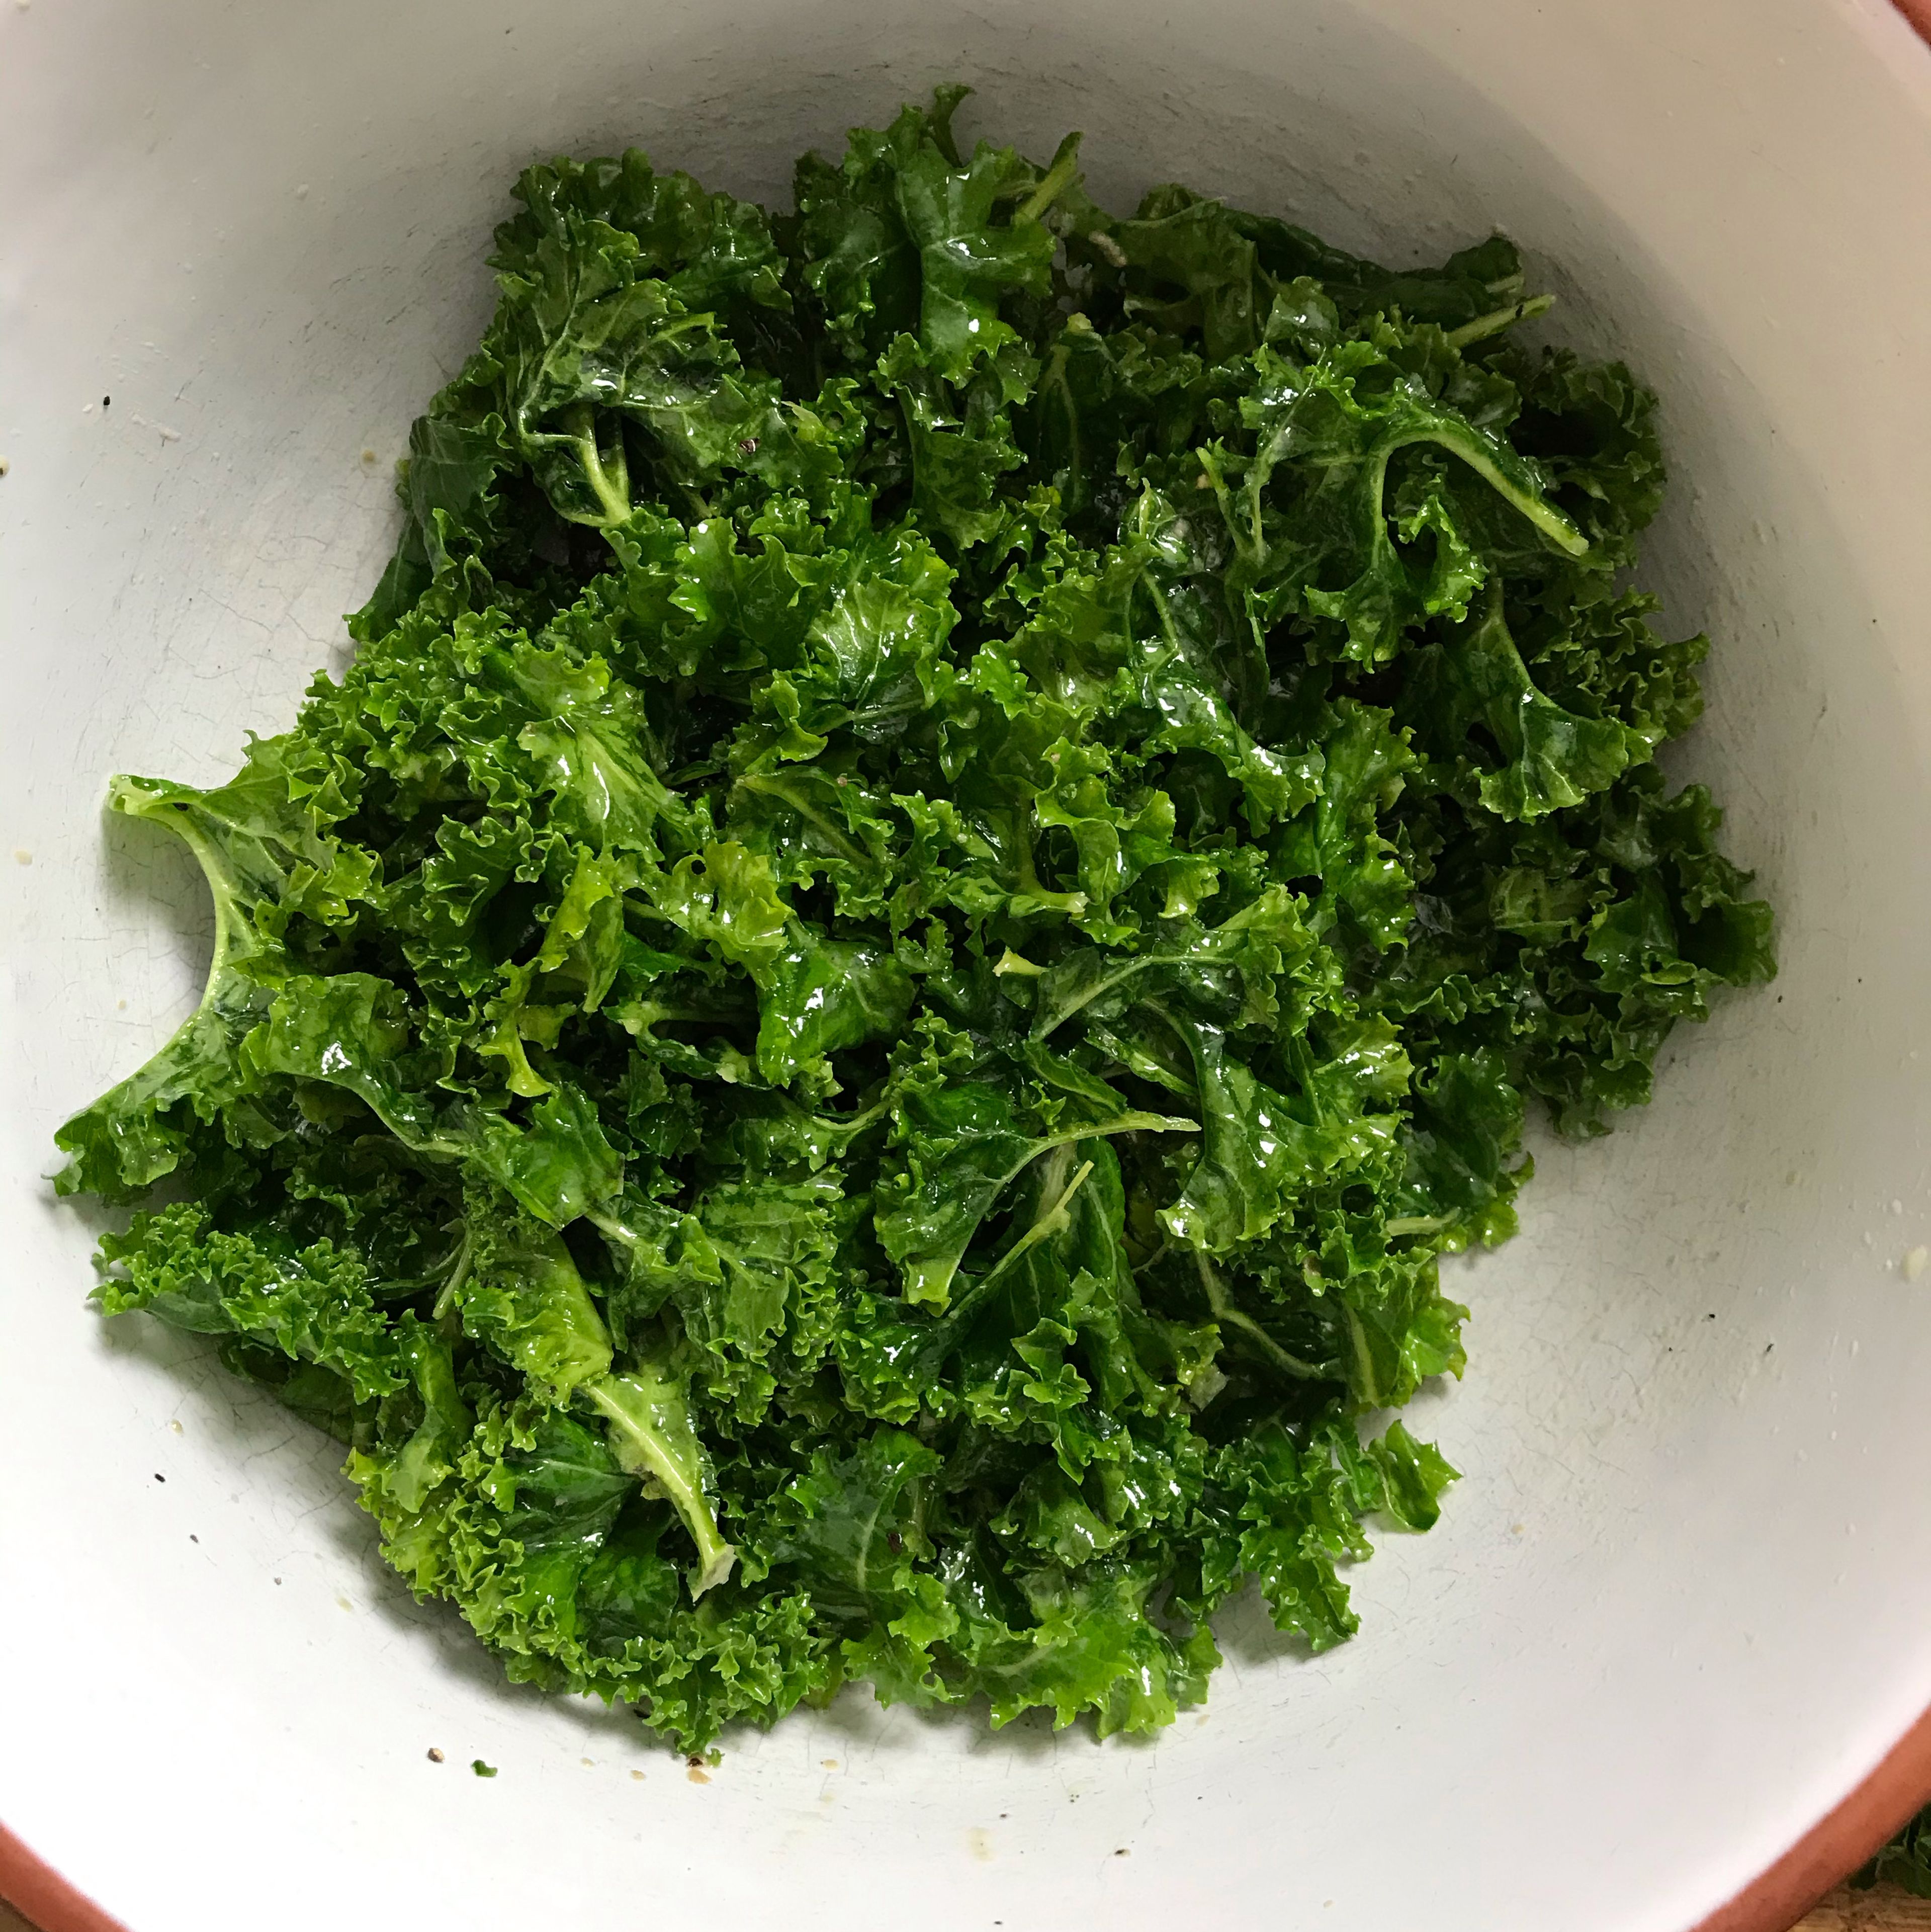 Mix olive oil with lemon juice, salt, pepper, and nutritional yeast flakes. Add the kale and knead everything with your hands.